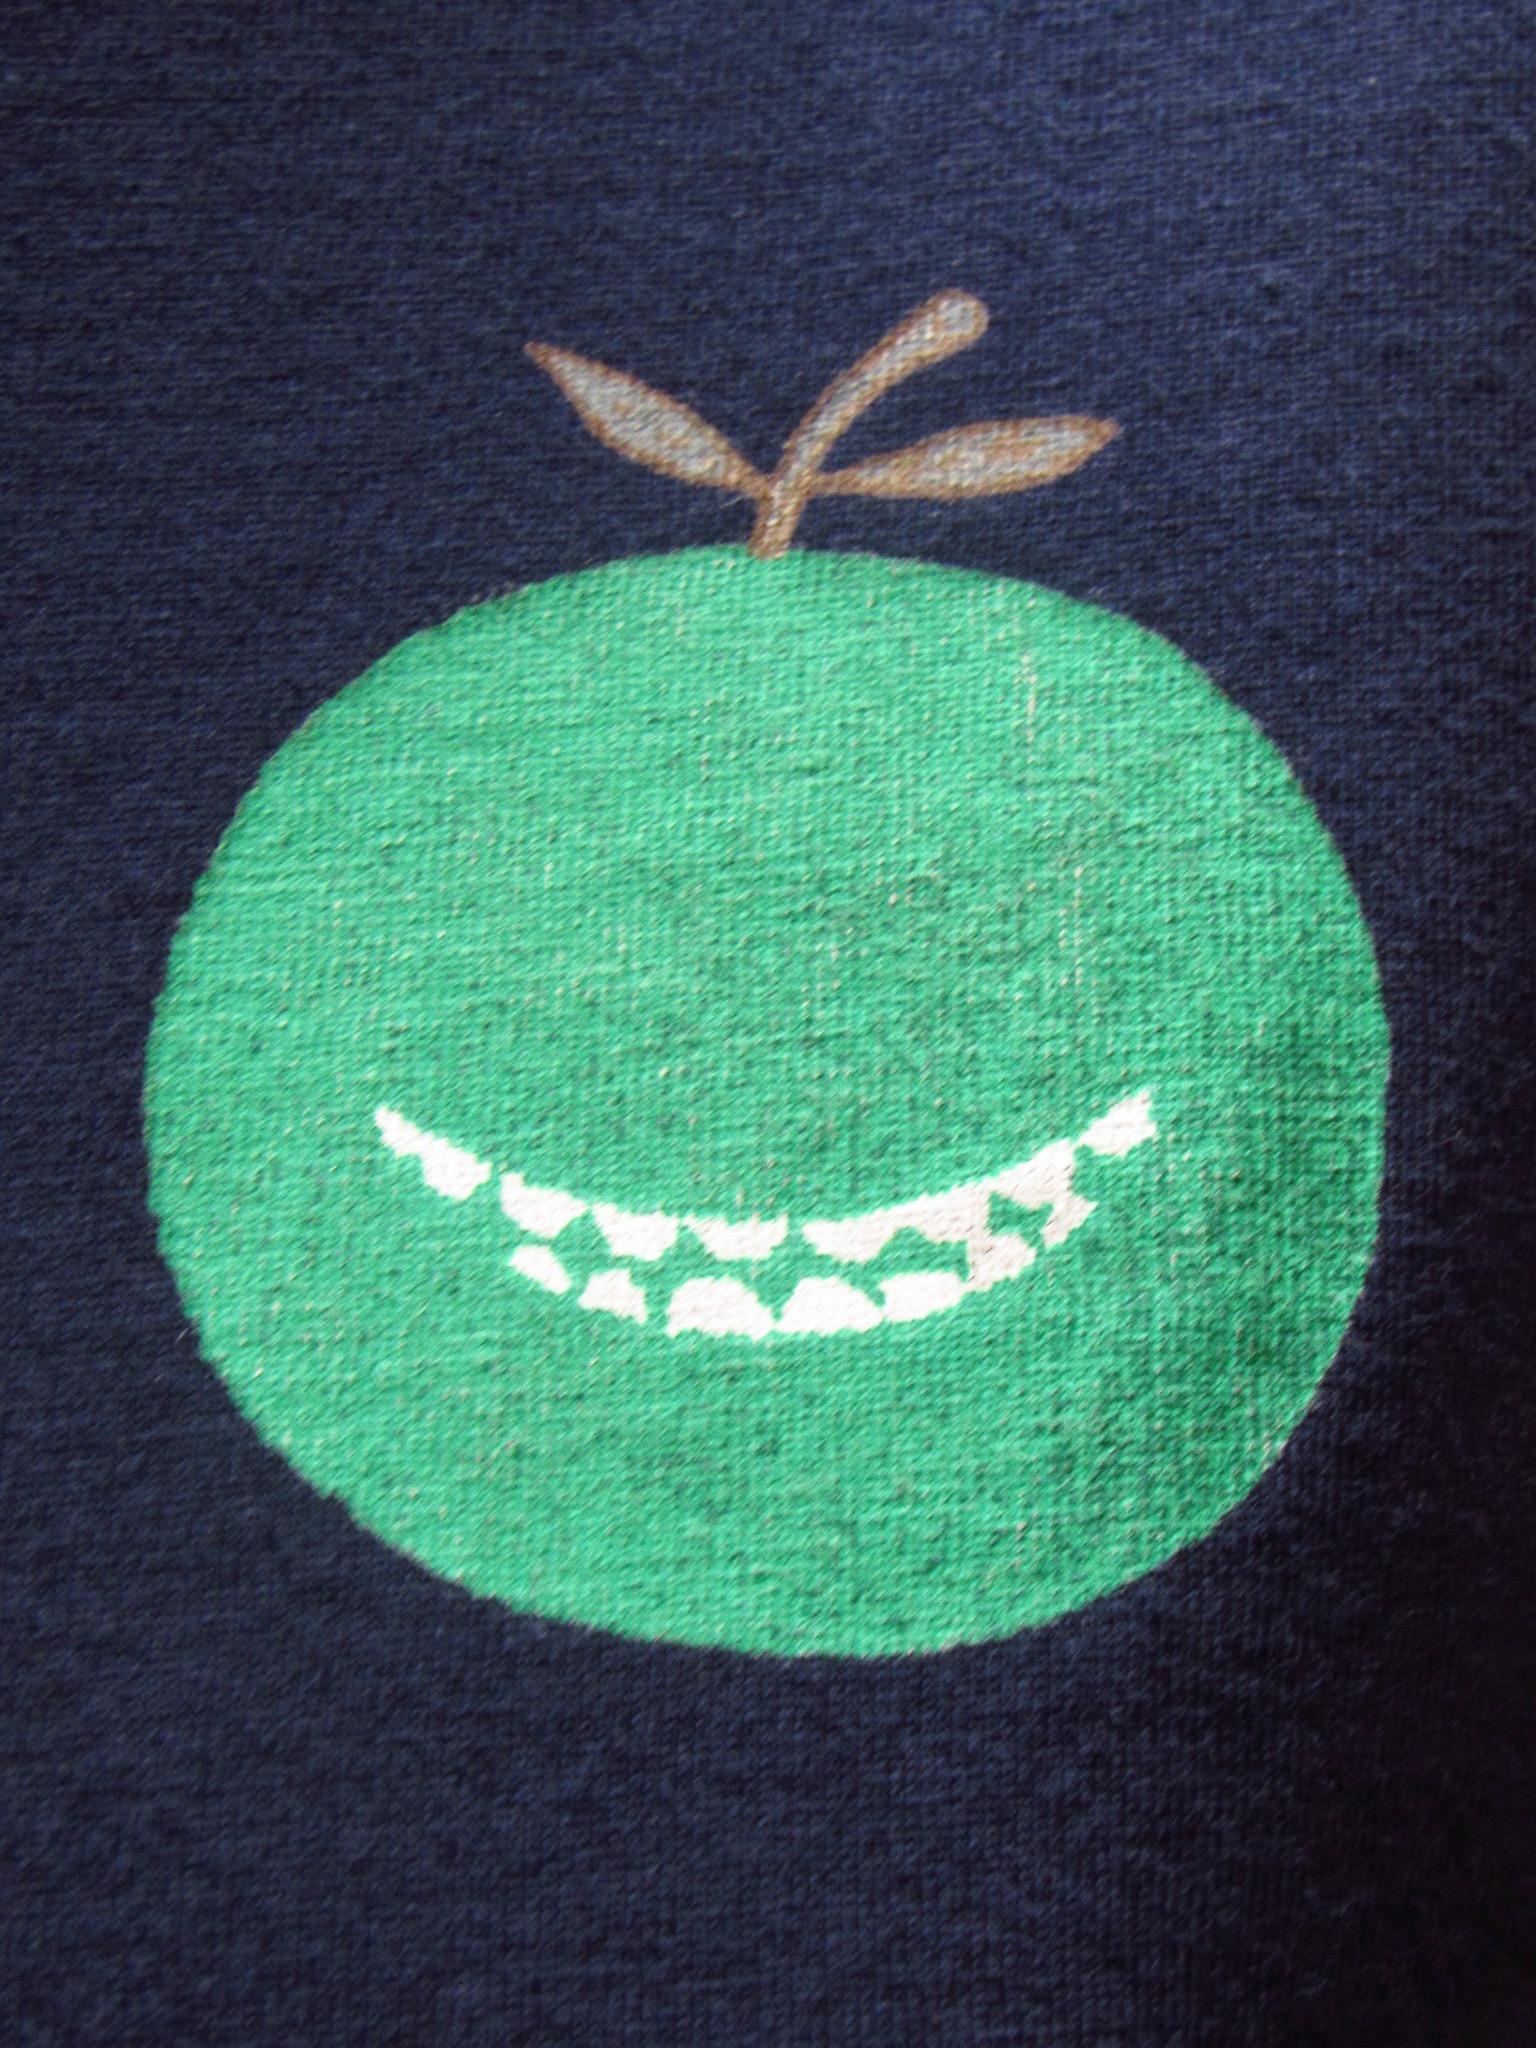 Black Undercover Grinning Apple Tee For Sale